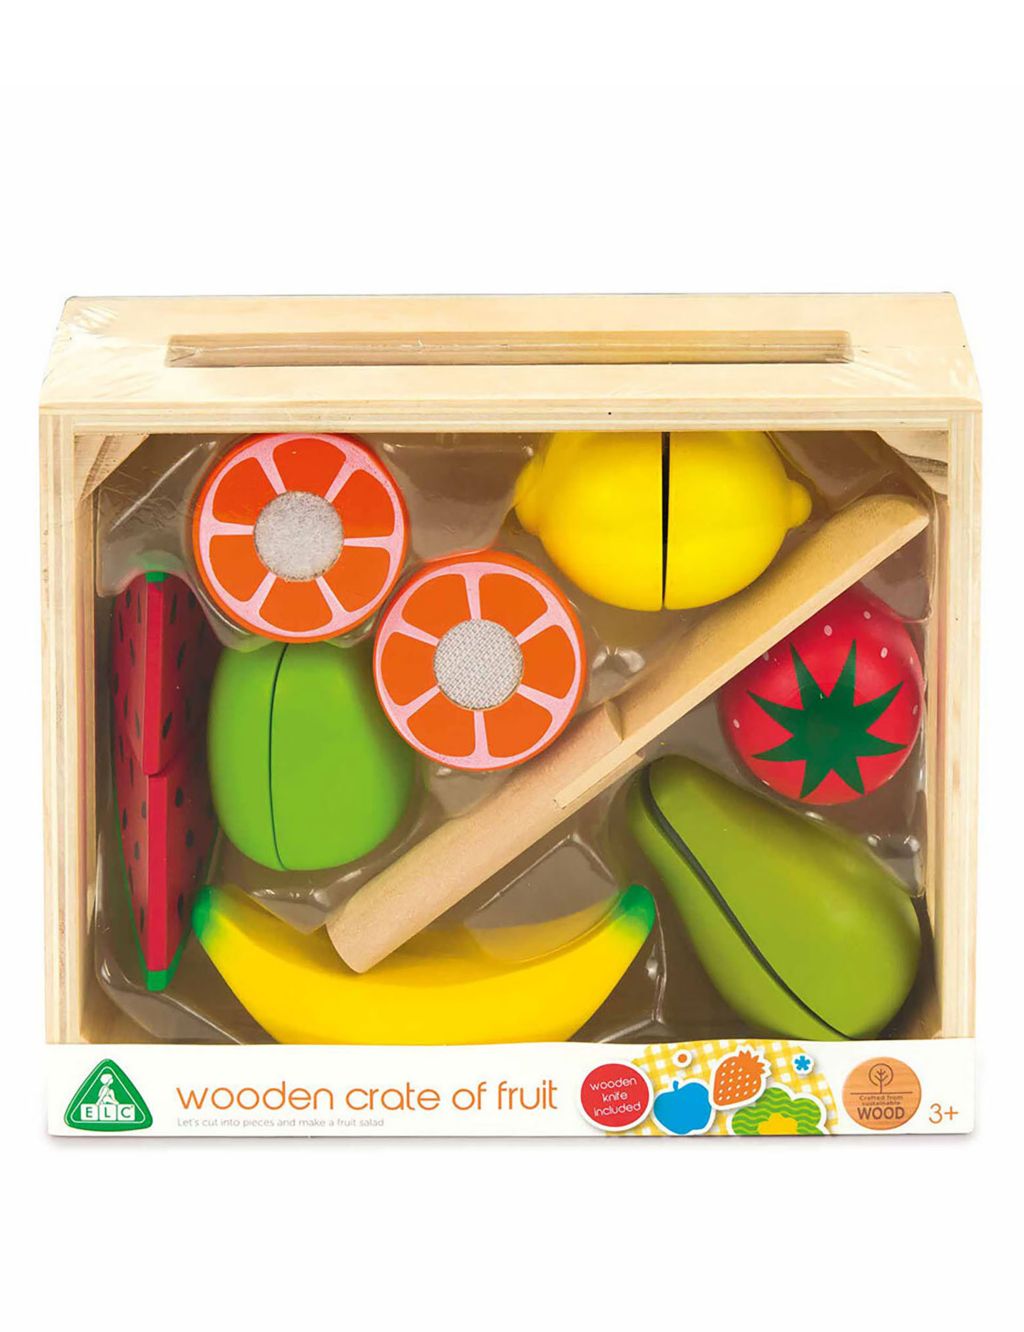 Wooden Fruit Crate (3+ Yrs) image 1